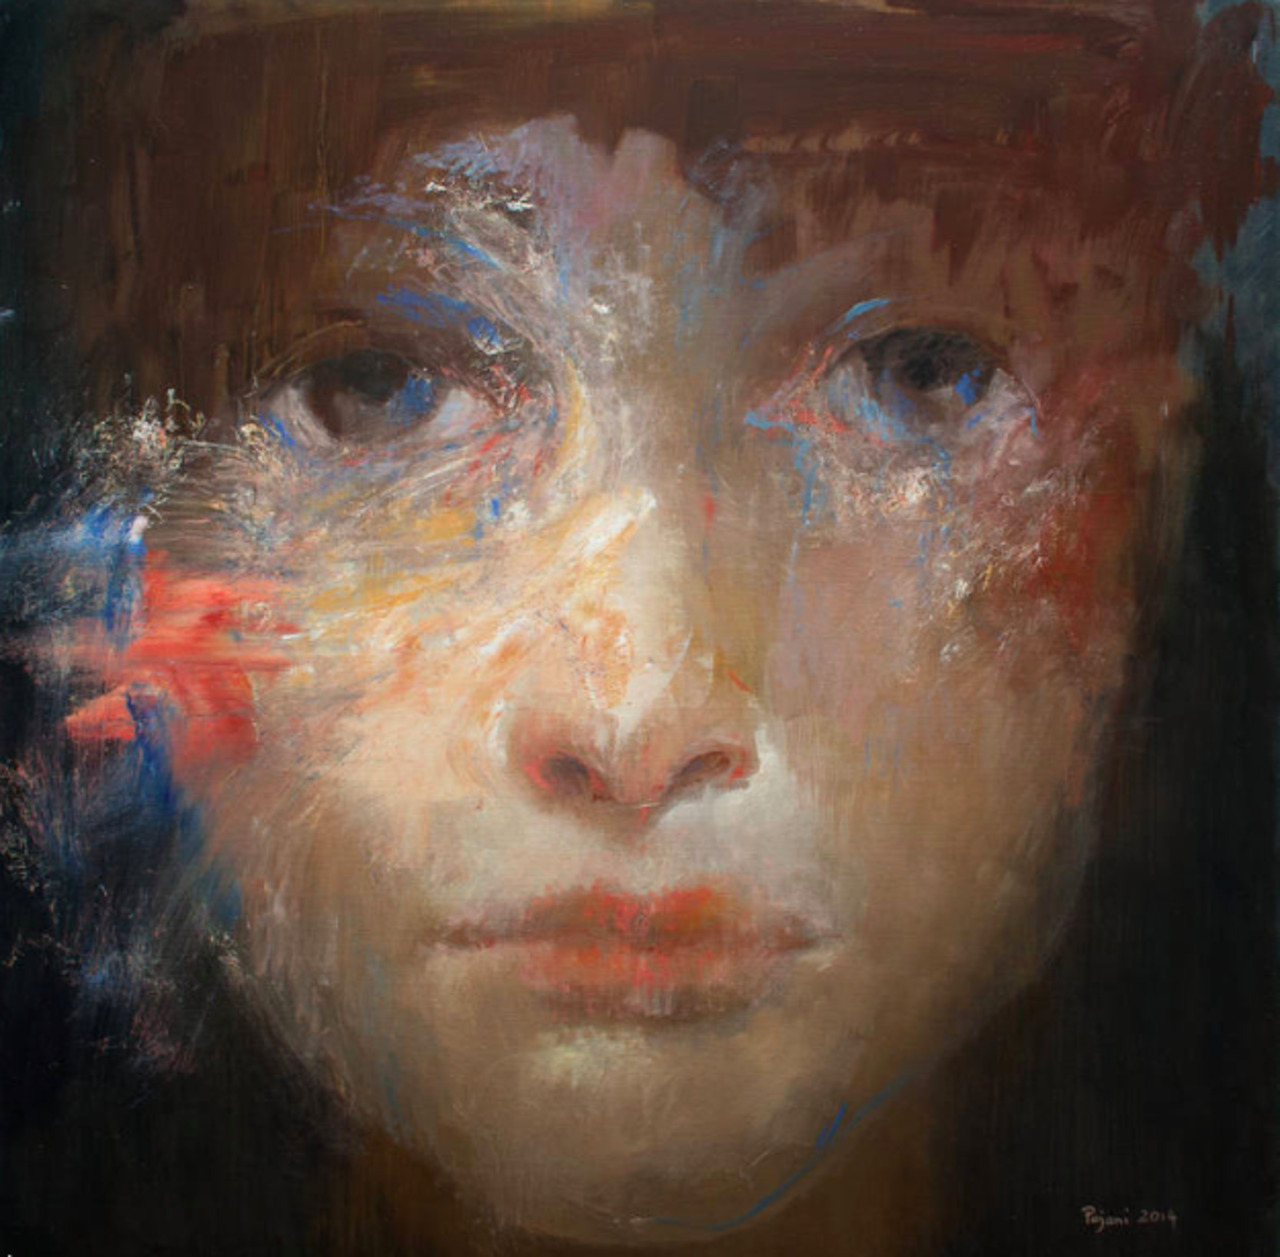 "@robertsnickc: ‘The End of Loneliness.’ #Portrait #painting by Ilir Pojani #art 
http://www.saatchiart.com/art/Painting-The-end-of-loneliness/298934/2251472/view http://t.co/NDkBhTXcX3"